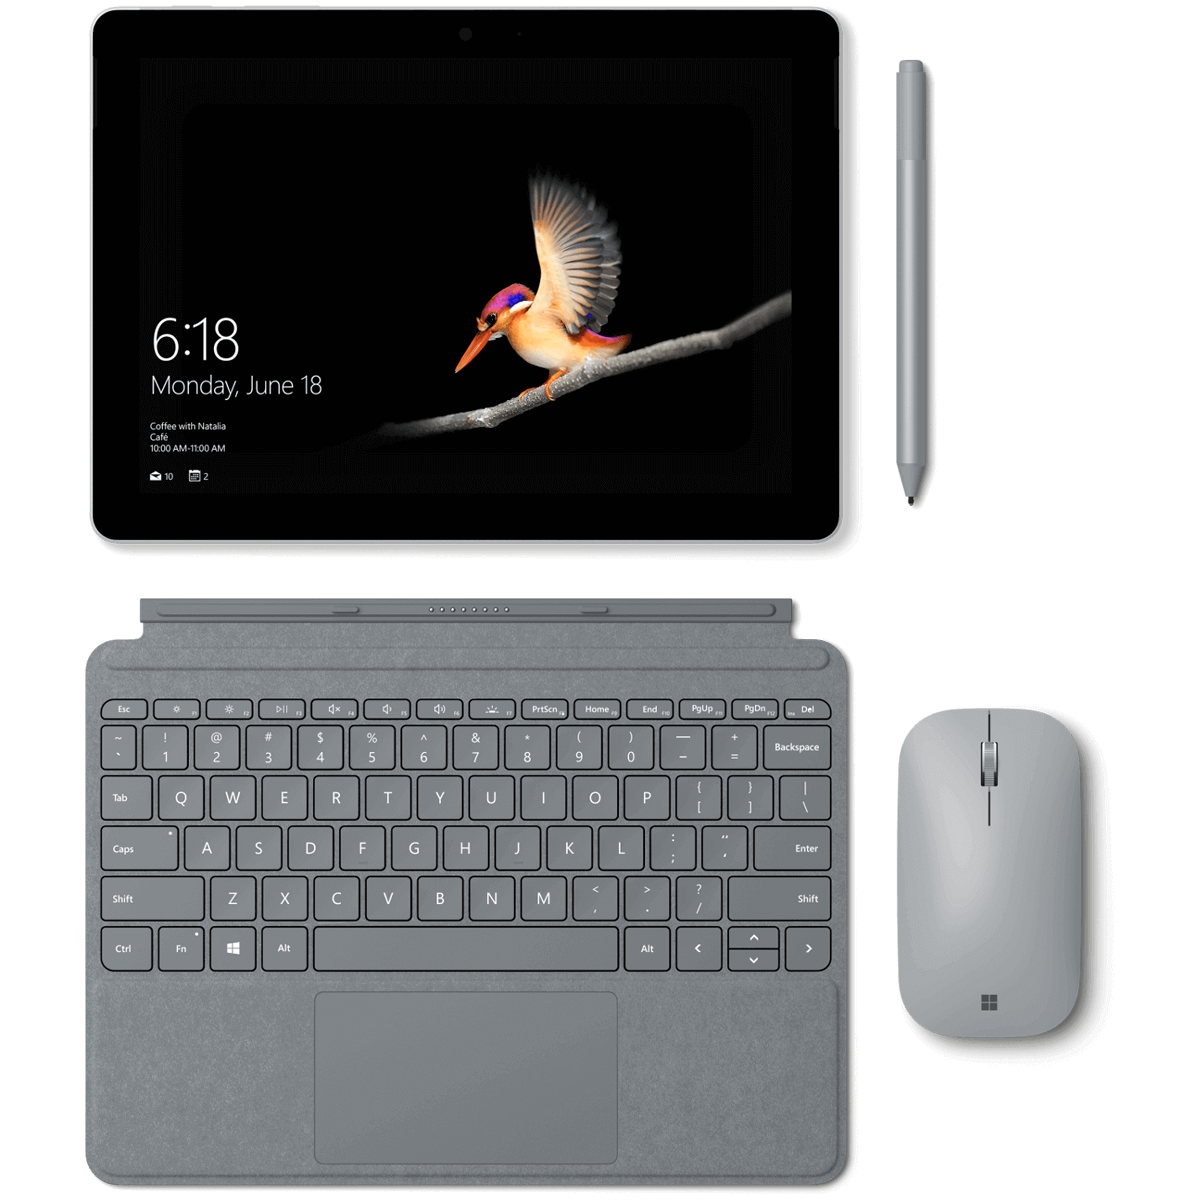 Best Surface Go 3 deals on Black Friday